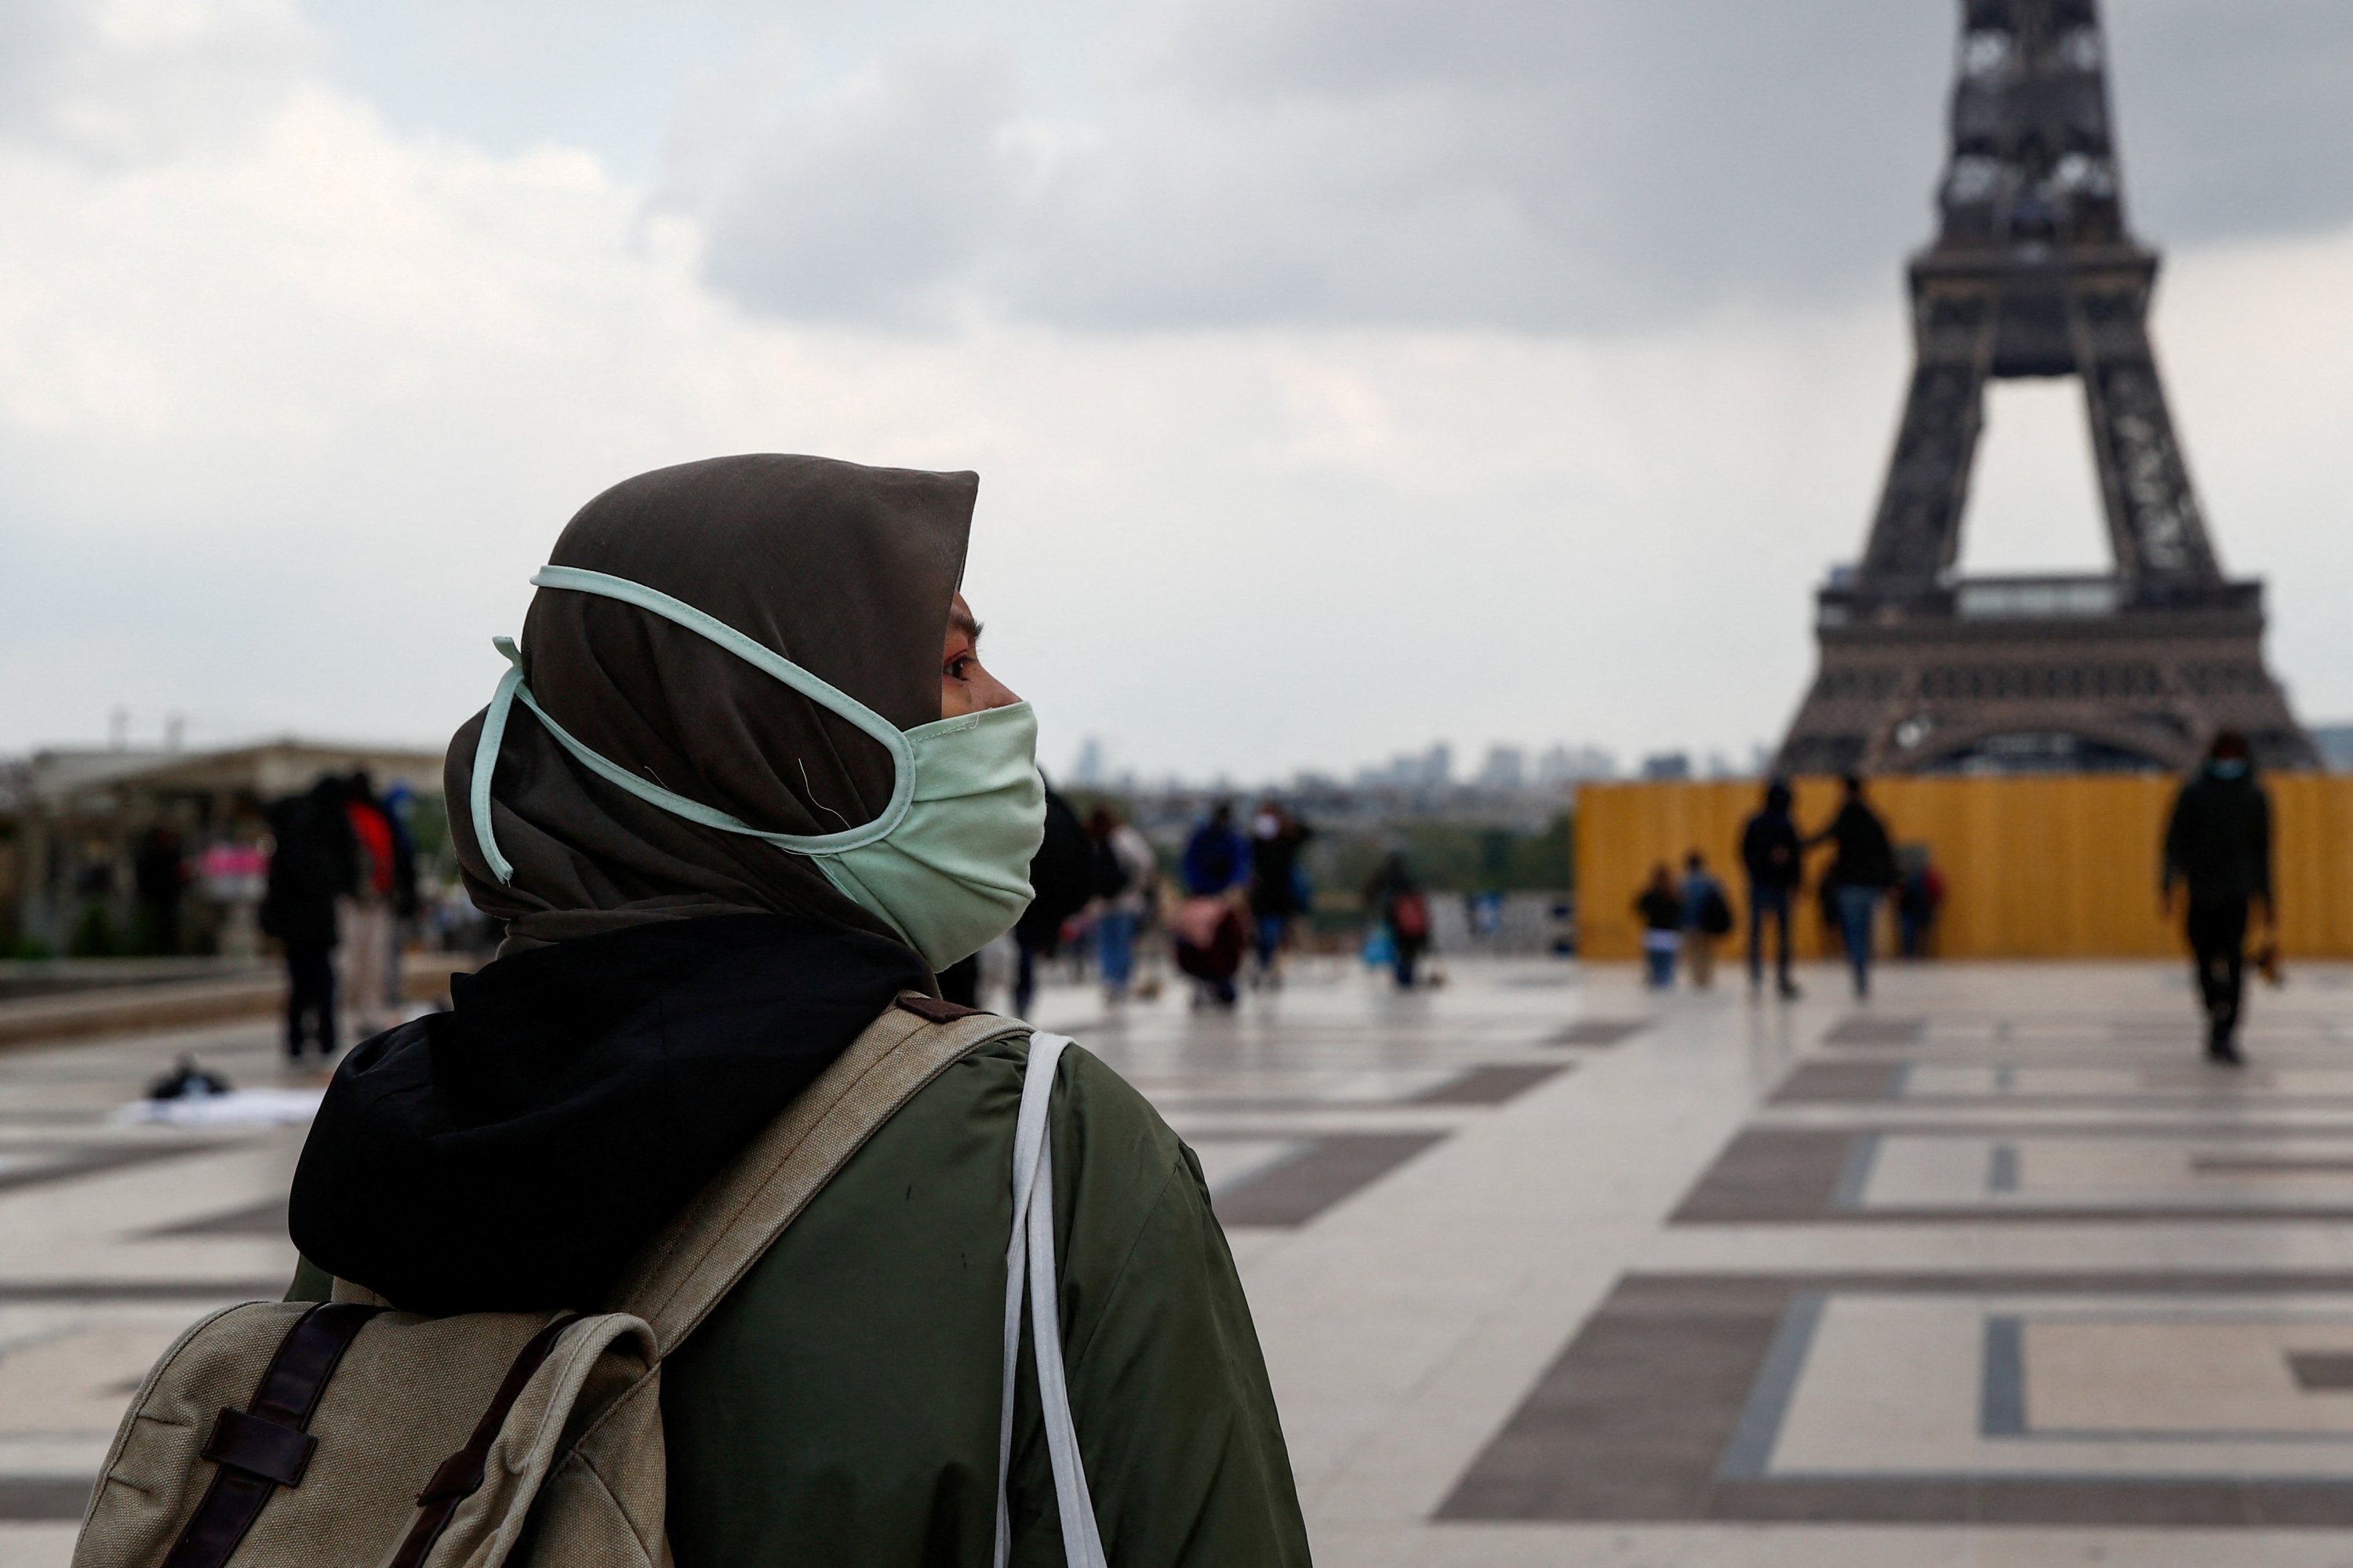 Hijabi student files United Nation complaint after being expelled from France school